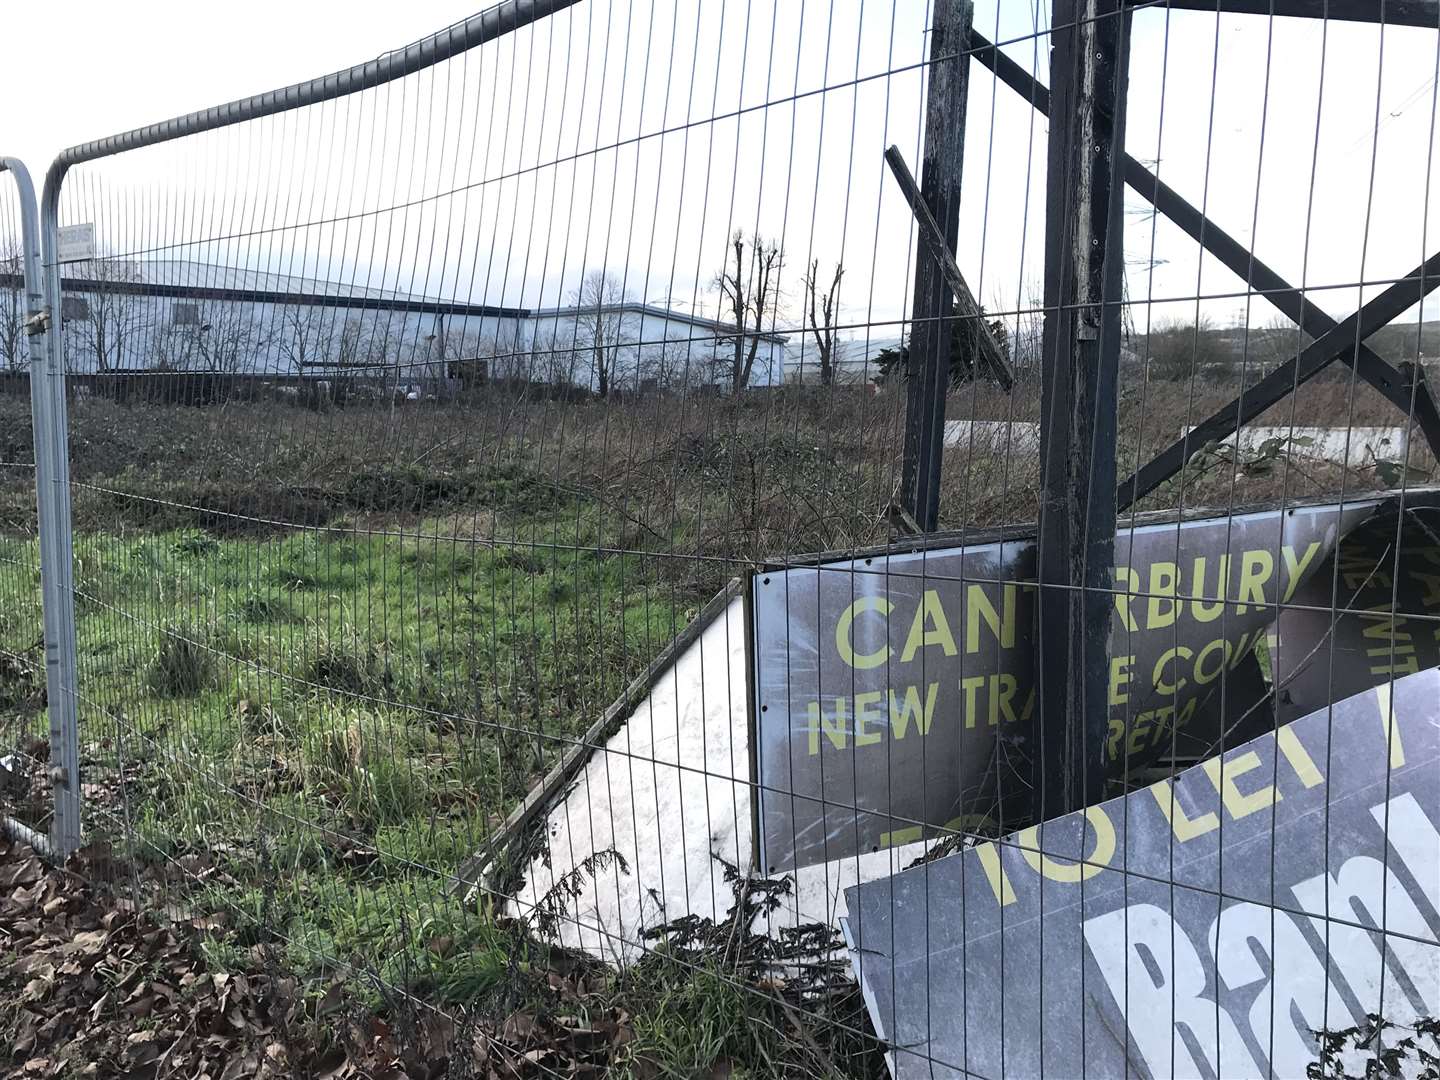 The site, which used to be part of the Southern Water sewage works, has long been a blot on the city's landscape